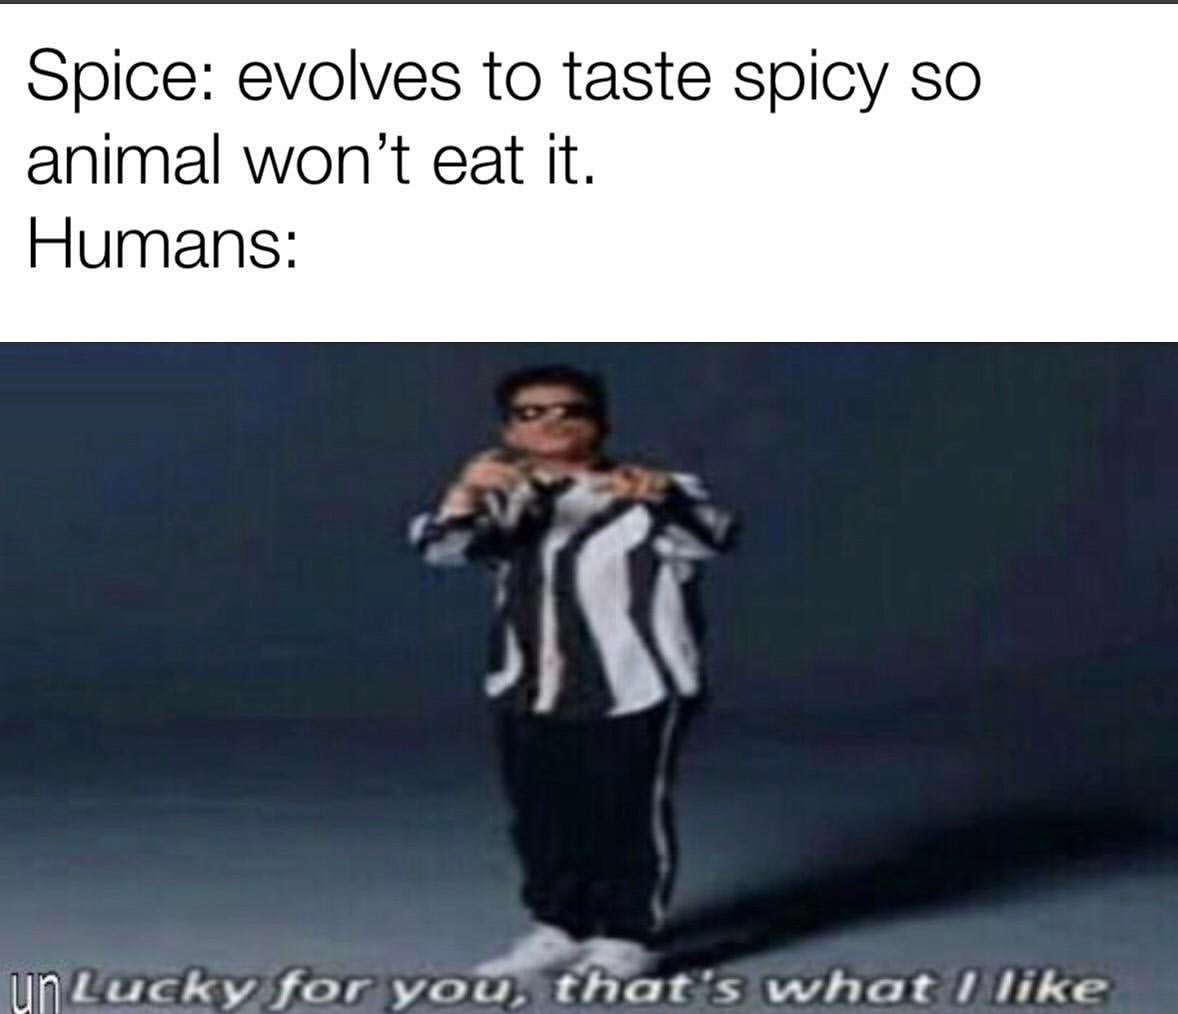 Spice: evolves to taste spicy so animal won't eat it.  Humans: Lucky for you, that's what I like.